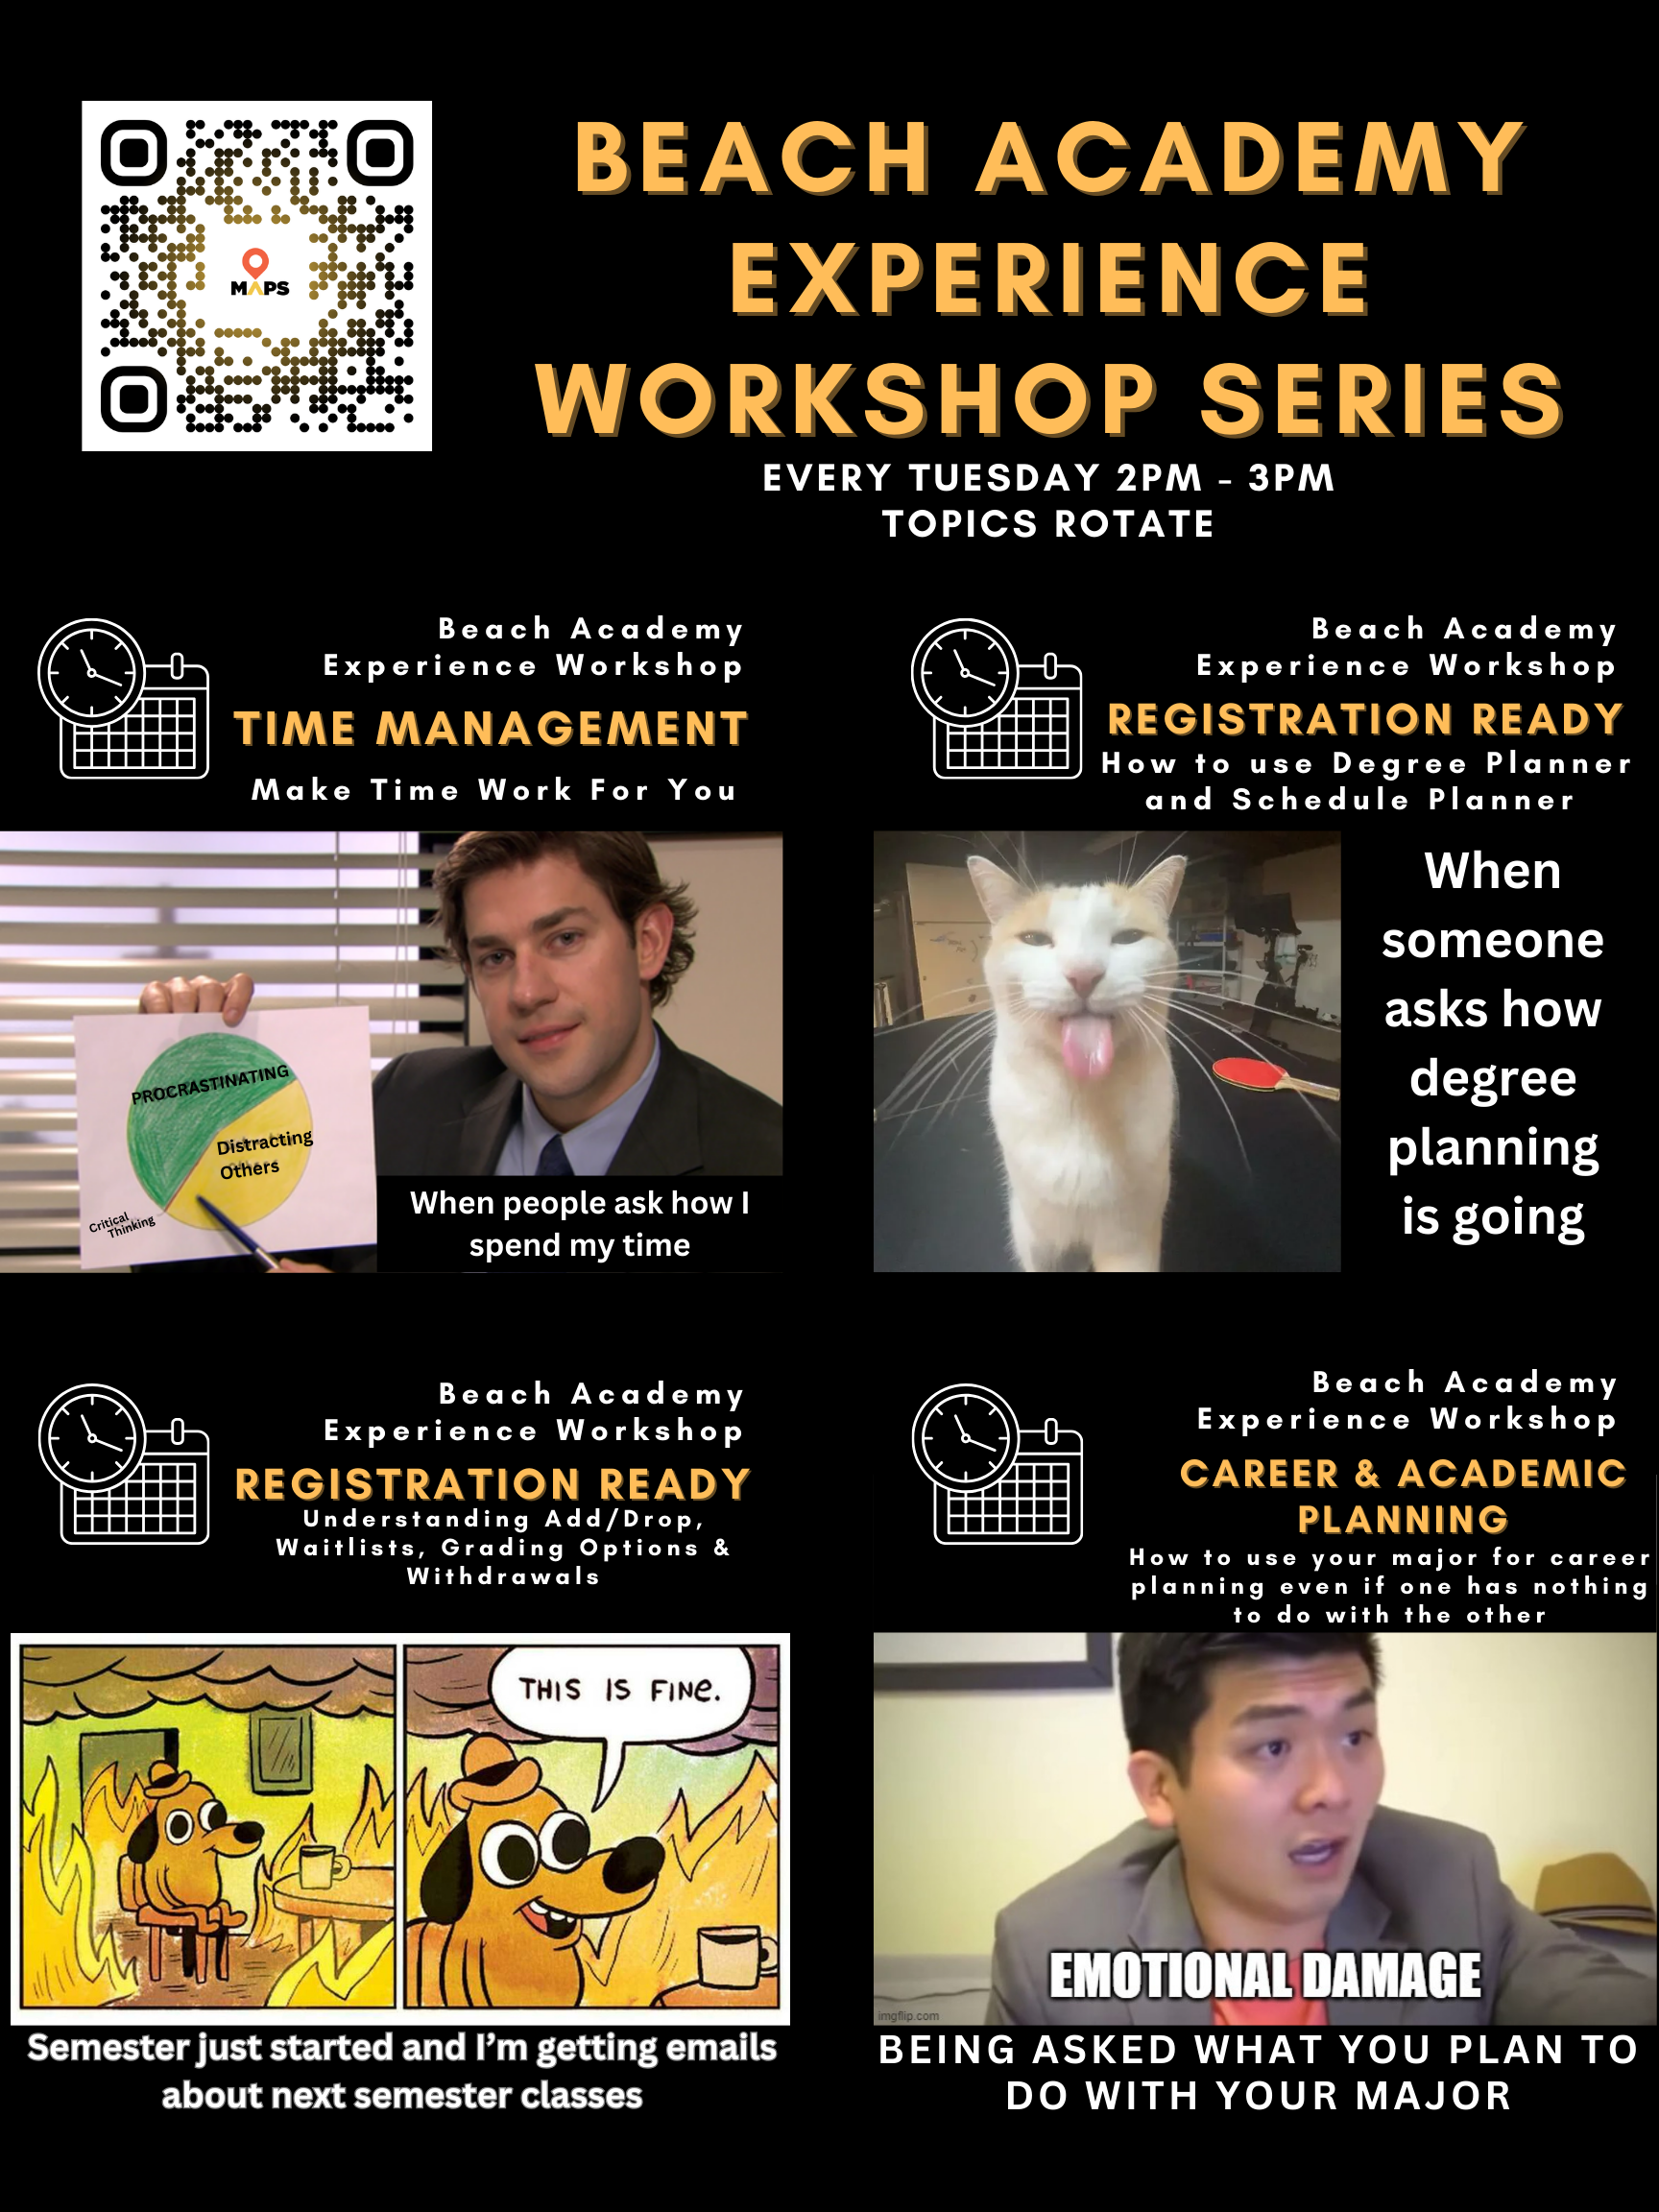 Beach Academy Experience Workshops poster for time management (Jim from the Office meme), degree planning (Bleh cat meme), registration support (I'm fine meme), and major/career planning (emotional damage meme) with MAPS QR code